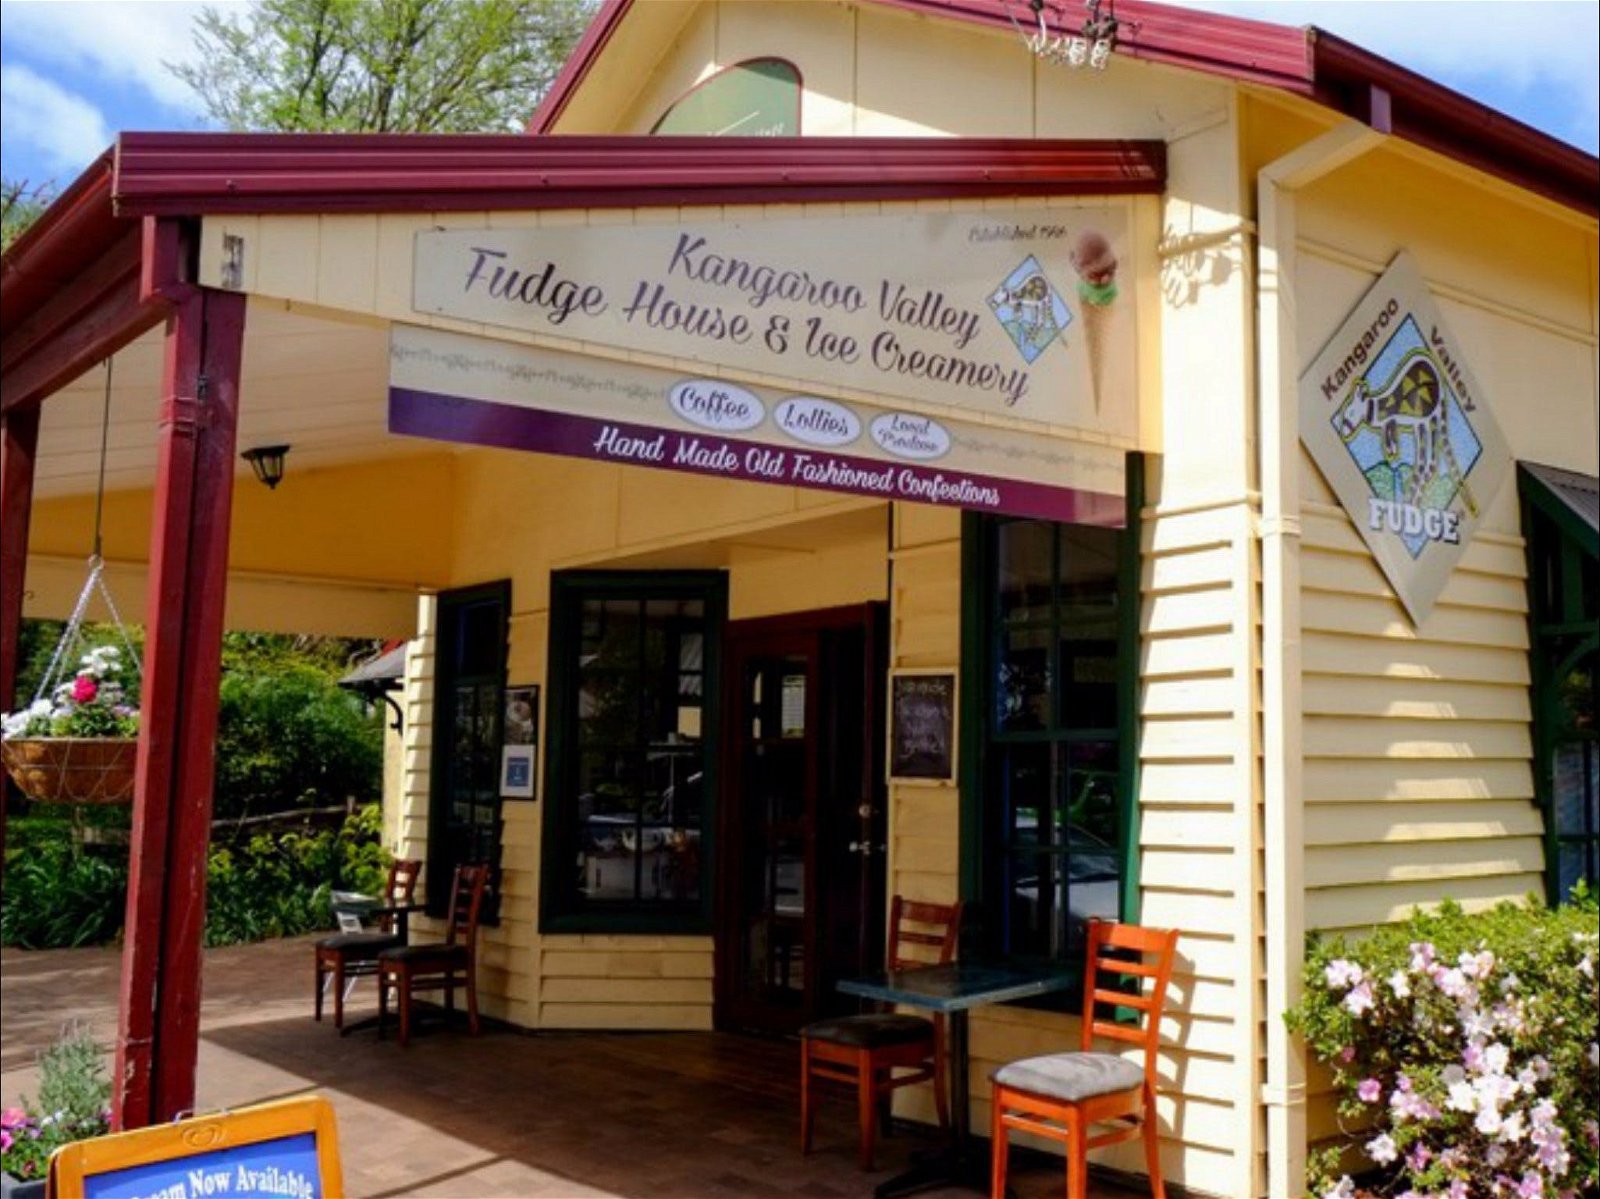 Kangaroo Valley Fudge House and Ice Creamery - New South Wales Tourism 